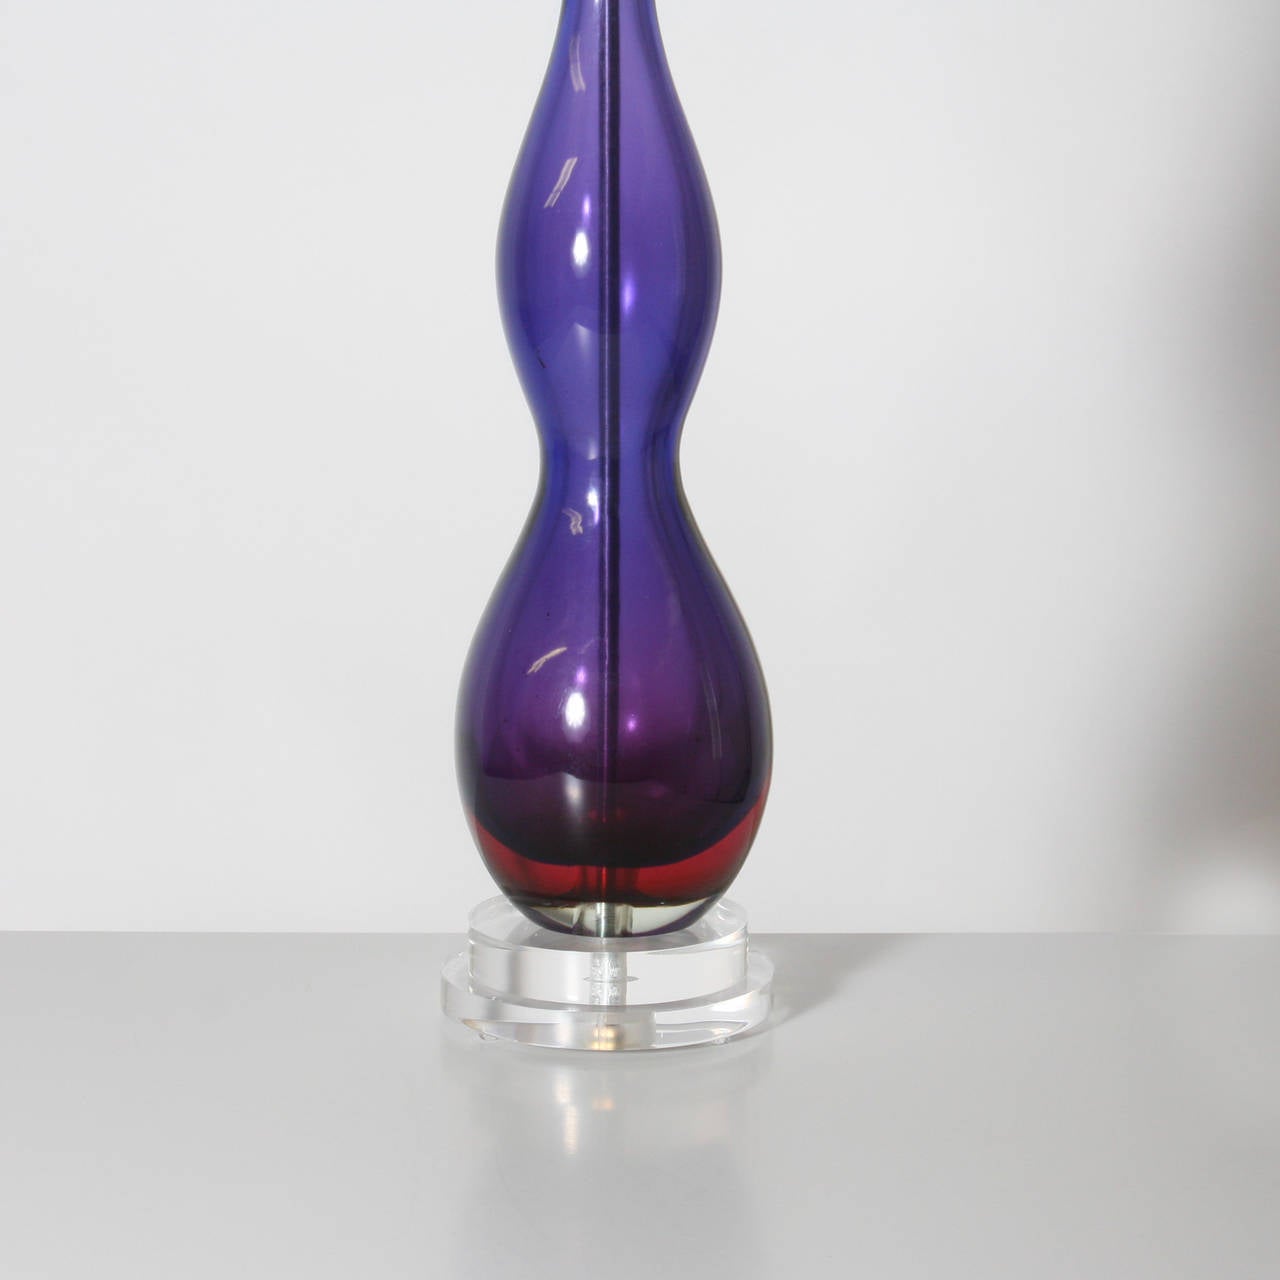 Sommerso Purple Lamp with Red Interior in the style of Poli. Gray shantung silk shade.